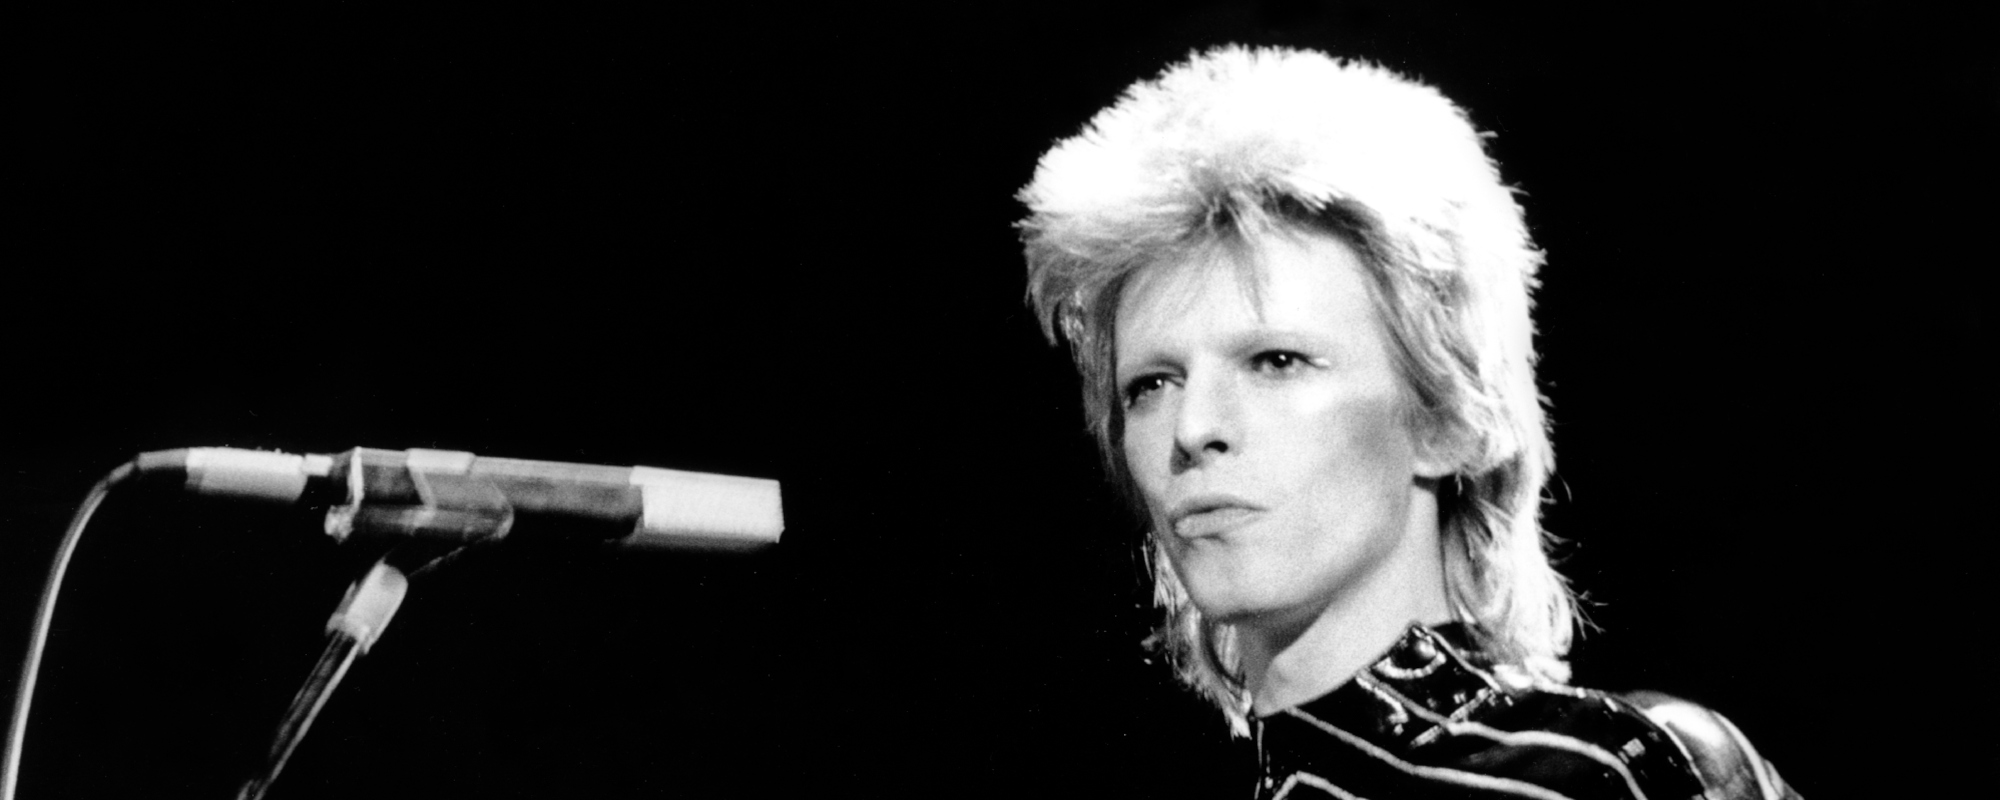 David Bowie’s Estate Teams Up With Nine Artists For Special NFT Project